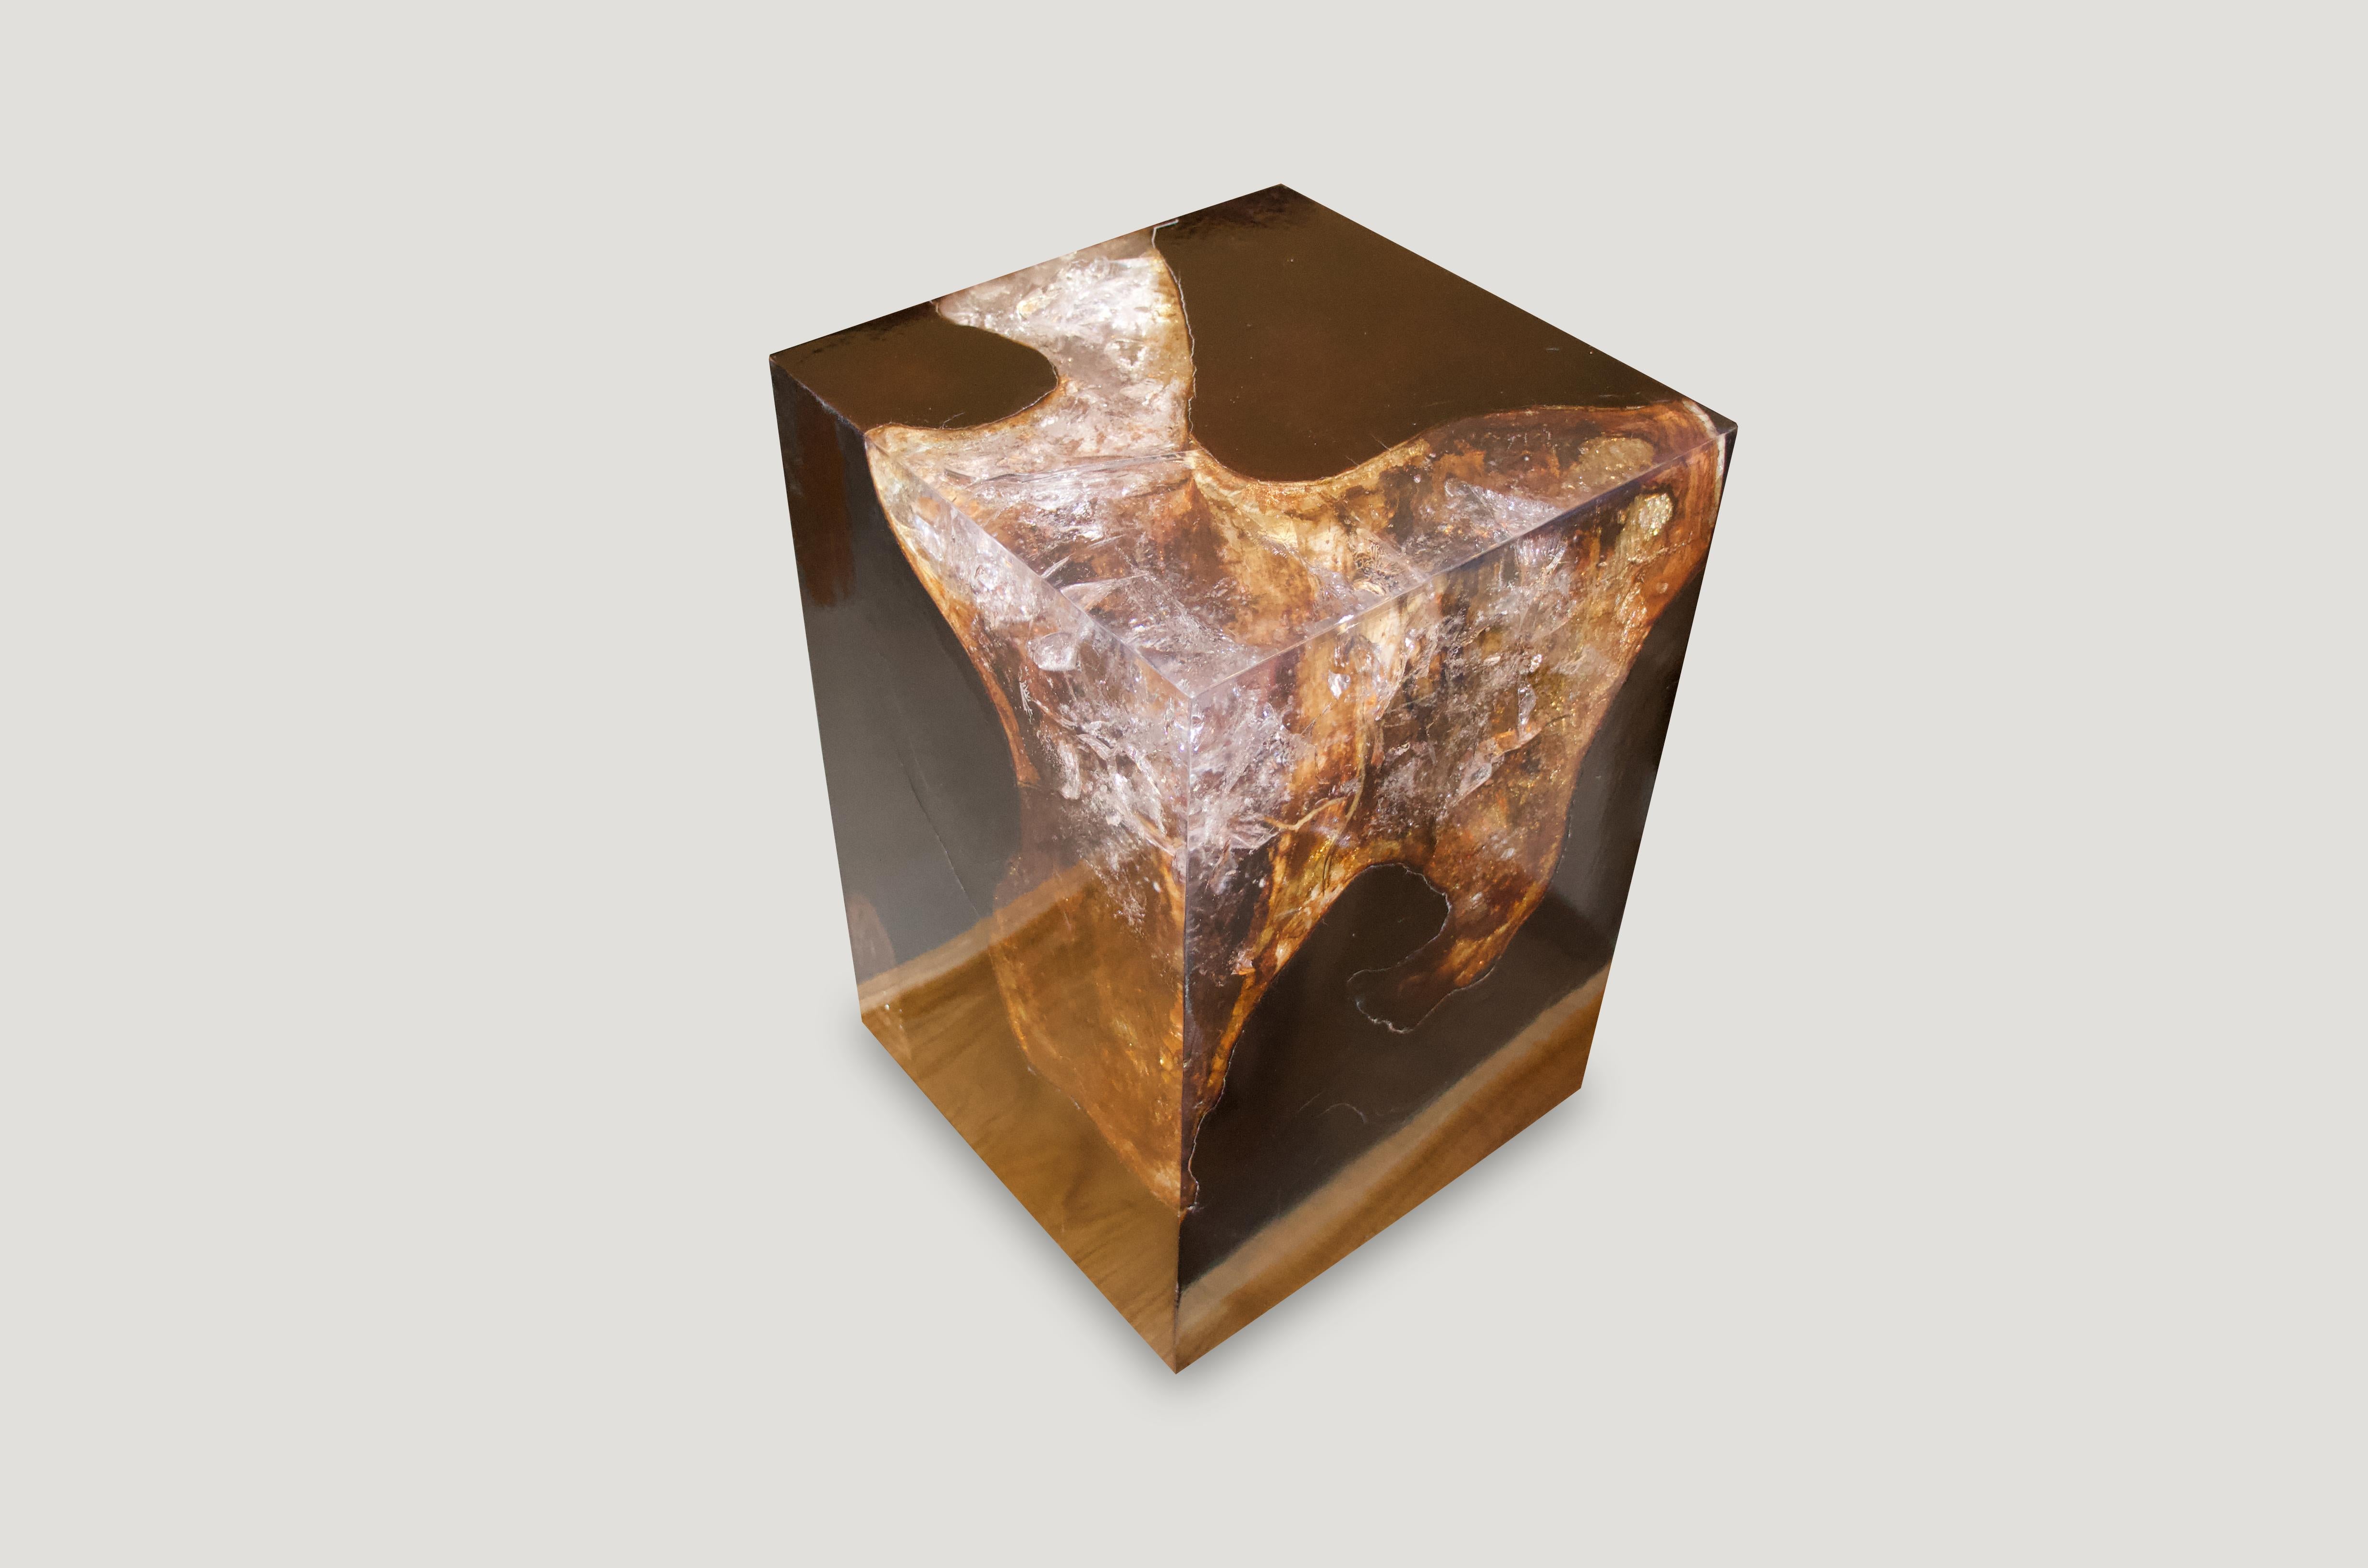 The cracked resin side table is made from teak infused with resin. A dramatic piece due to the depth of the resin, which resembles a unique quartz crystal with many different facets. An impressive addition to any space.

The cracked Resin